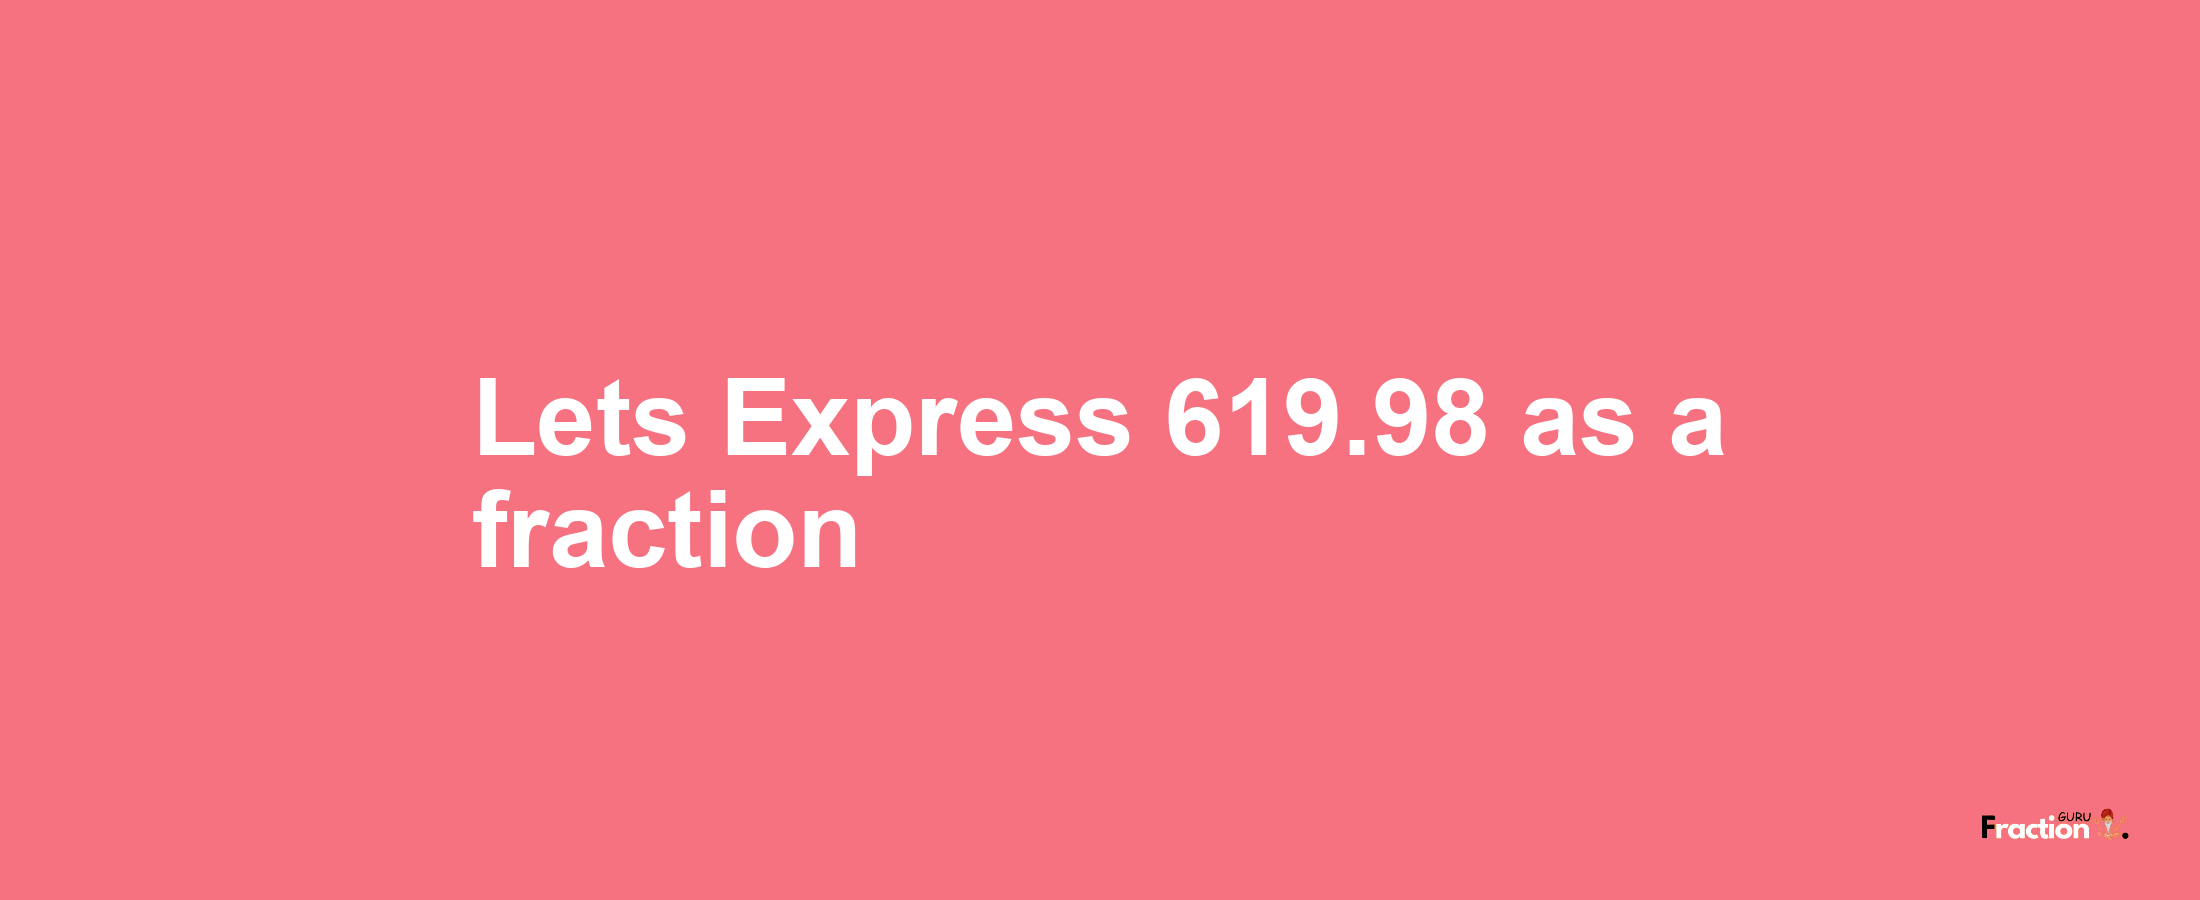 Lets Express 619.98 as afraction